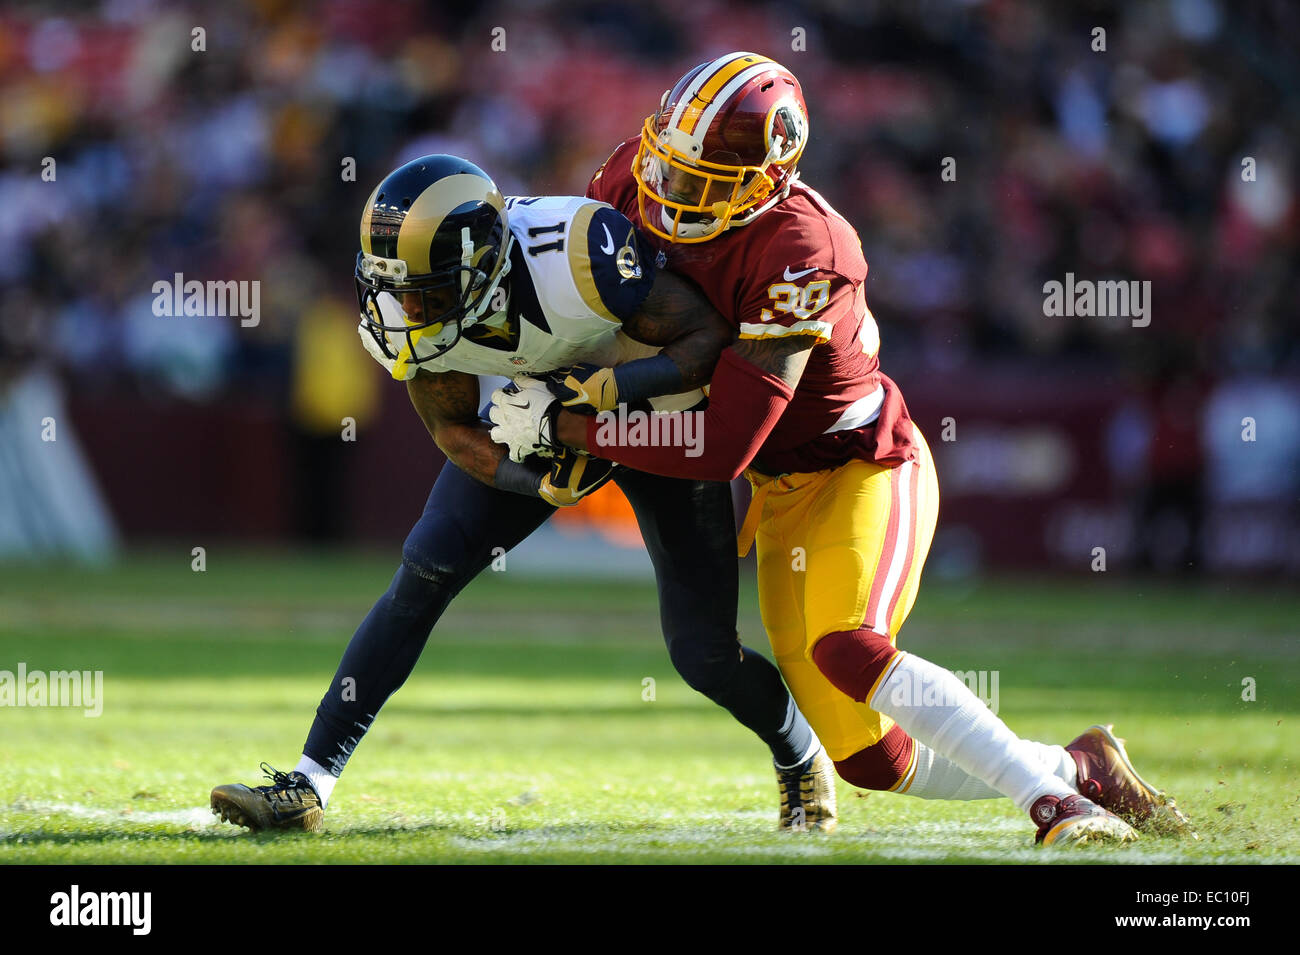 Landover, Maryland, USA. 07th Dec, 2014. Washington Redskins cornerback David Amerson (39) tackles St. Louis Rams wide receiver Tavon Austin (11) during the matchup between the St. Louis Rams and the Washington Redskins at FedEx Field in Landover, MD. Credit:  Cal Sport Media/Alamy Live News Stock Photo